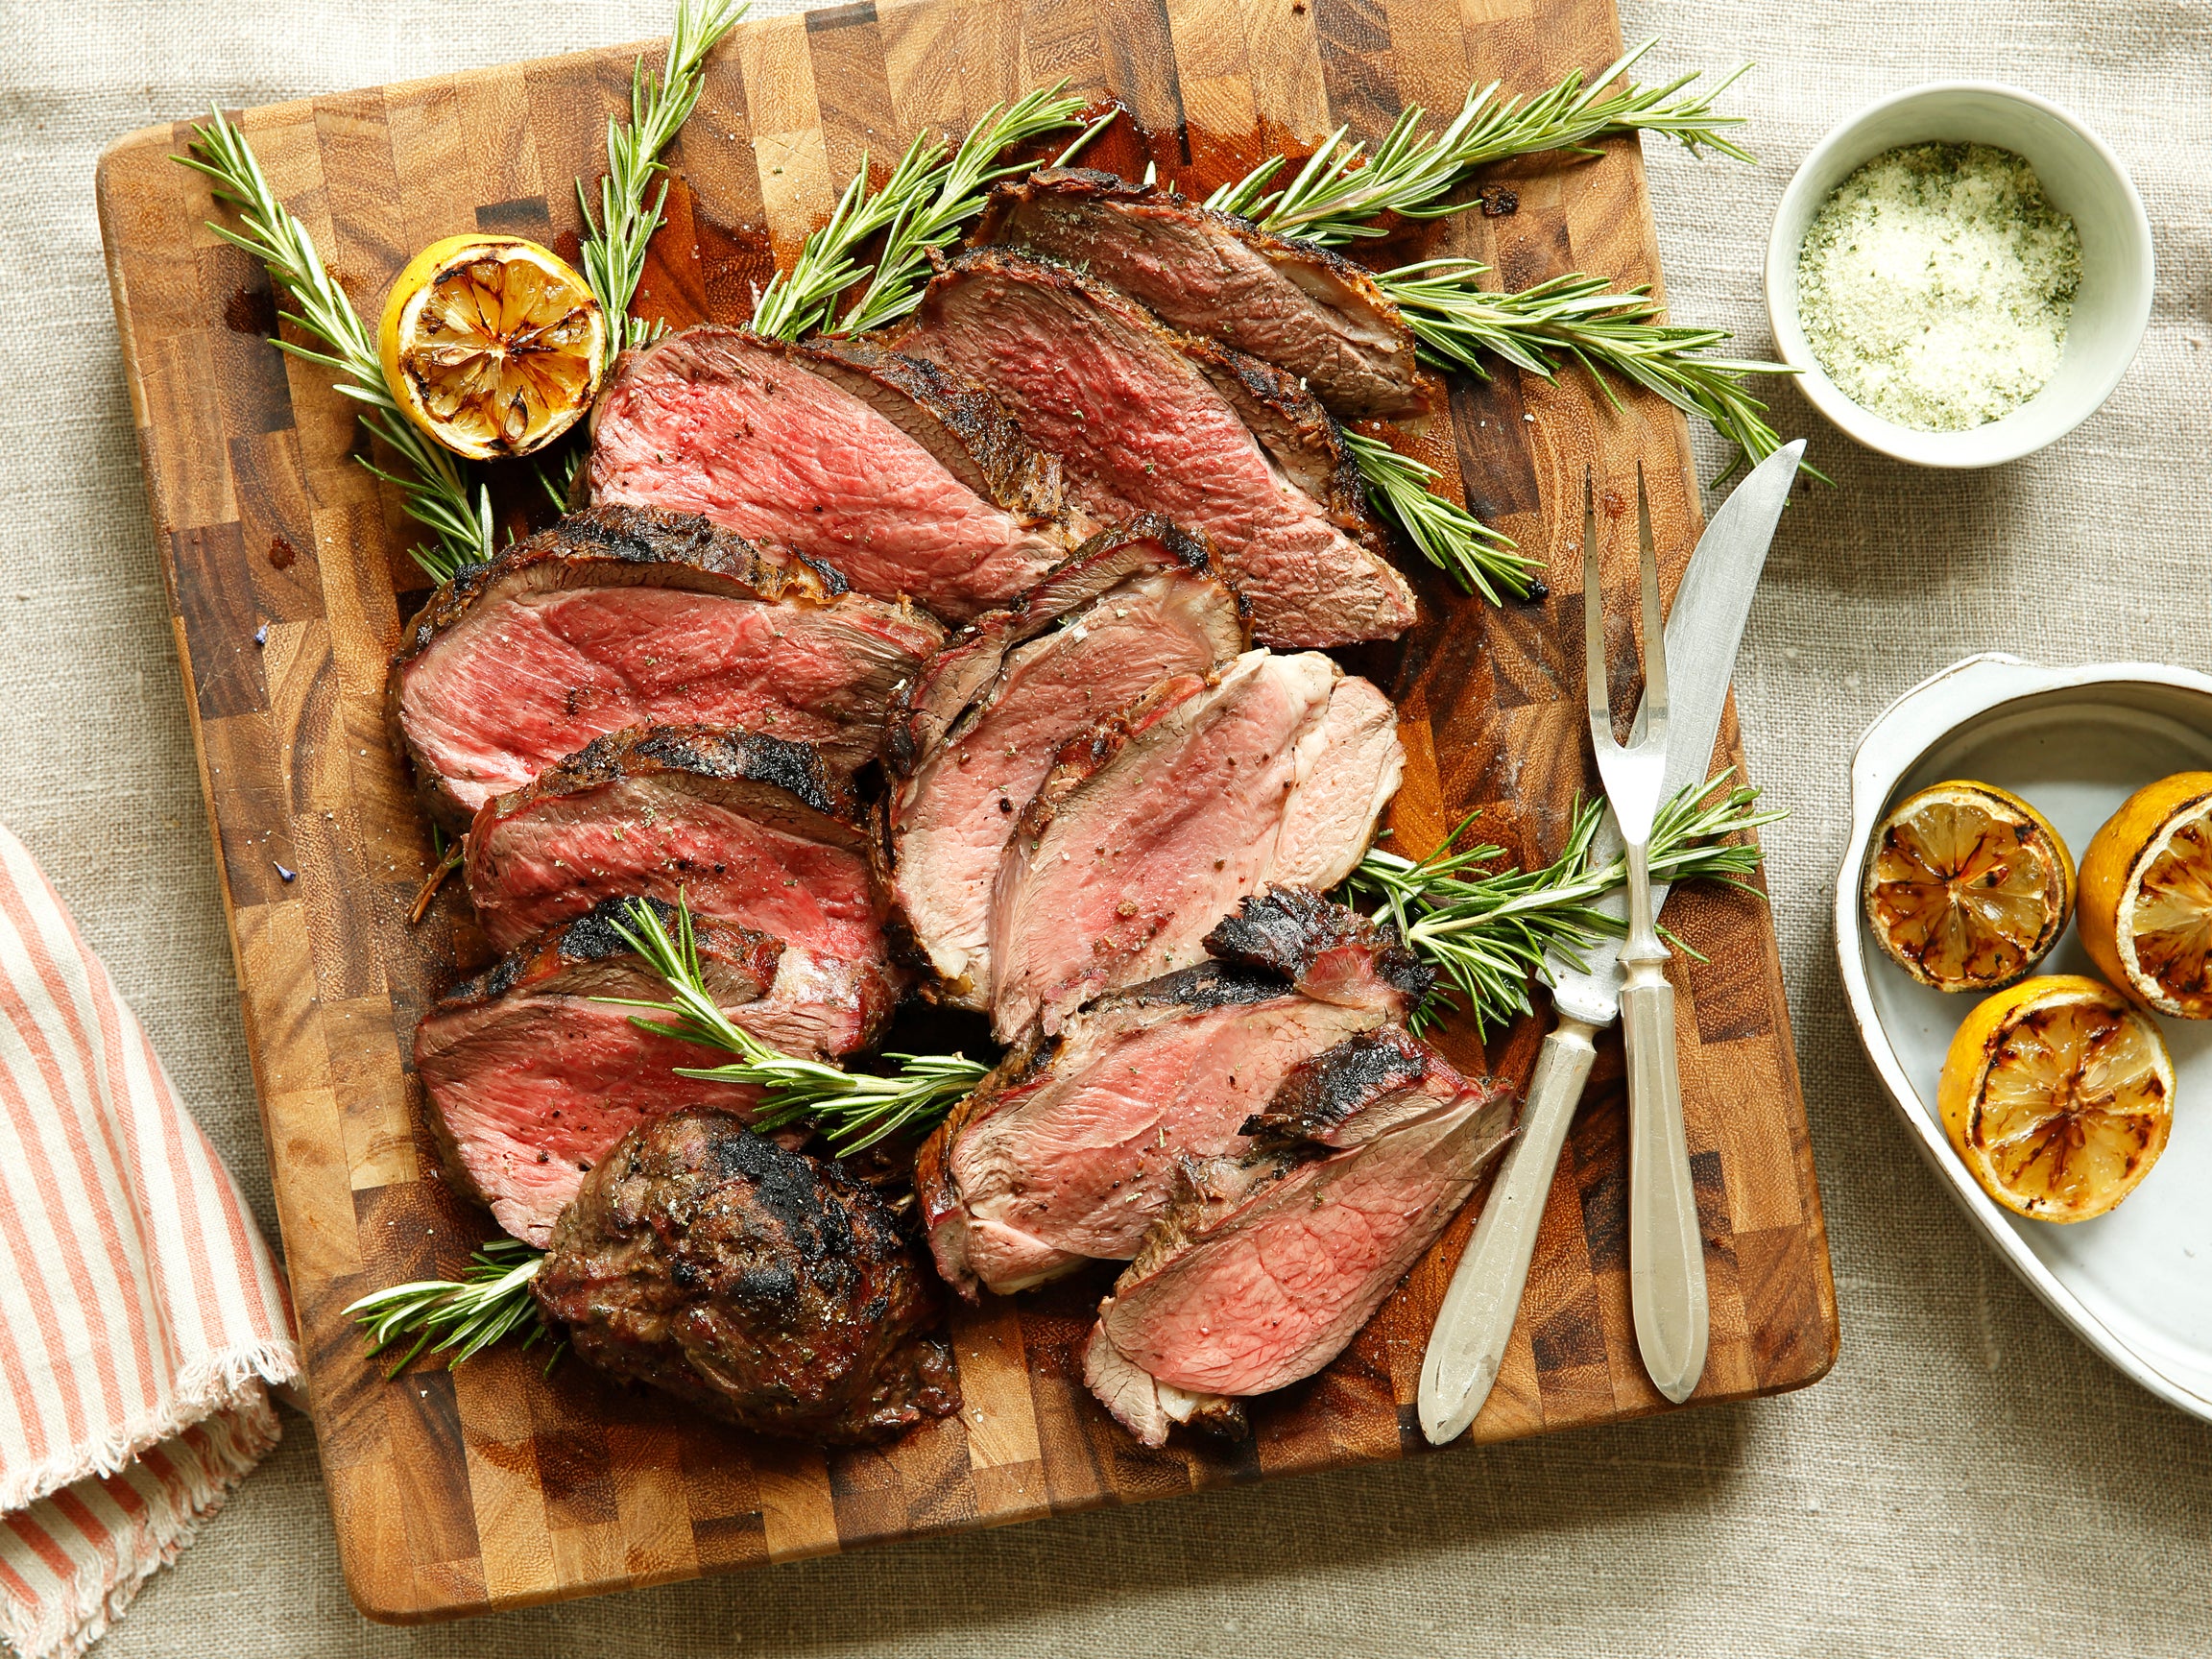 Grilled Butterflied Leg of Lamb with Rosemary Sea Salt & Charred Lemons